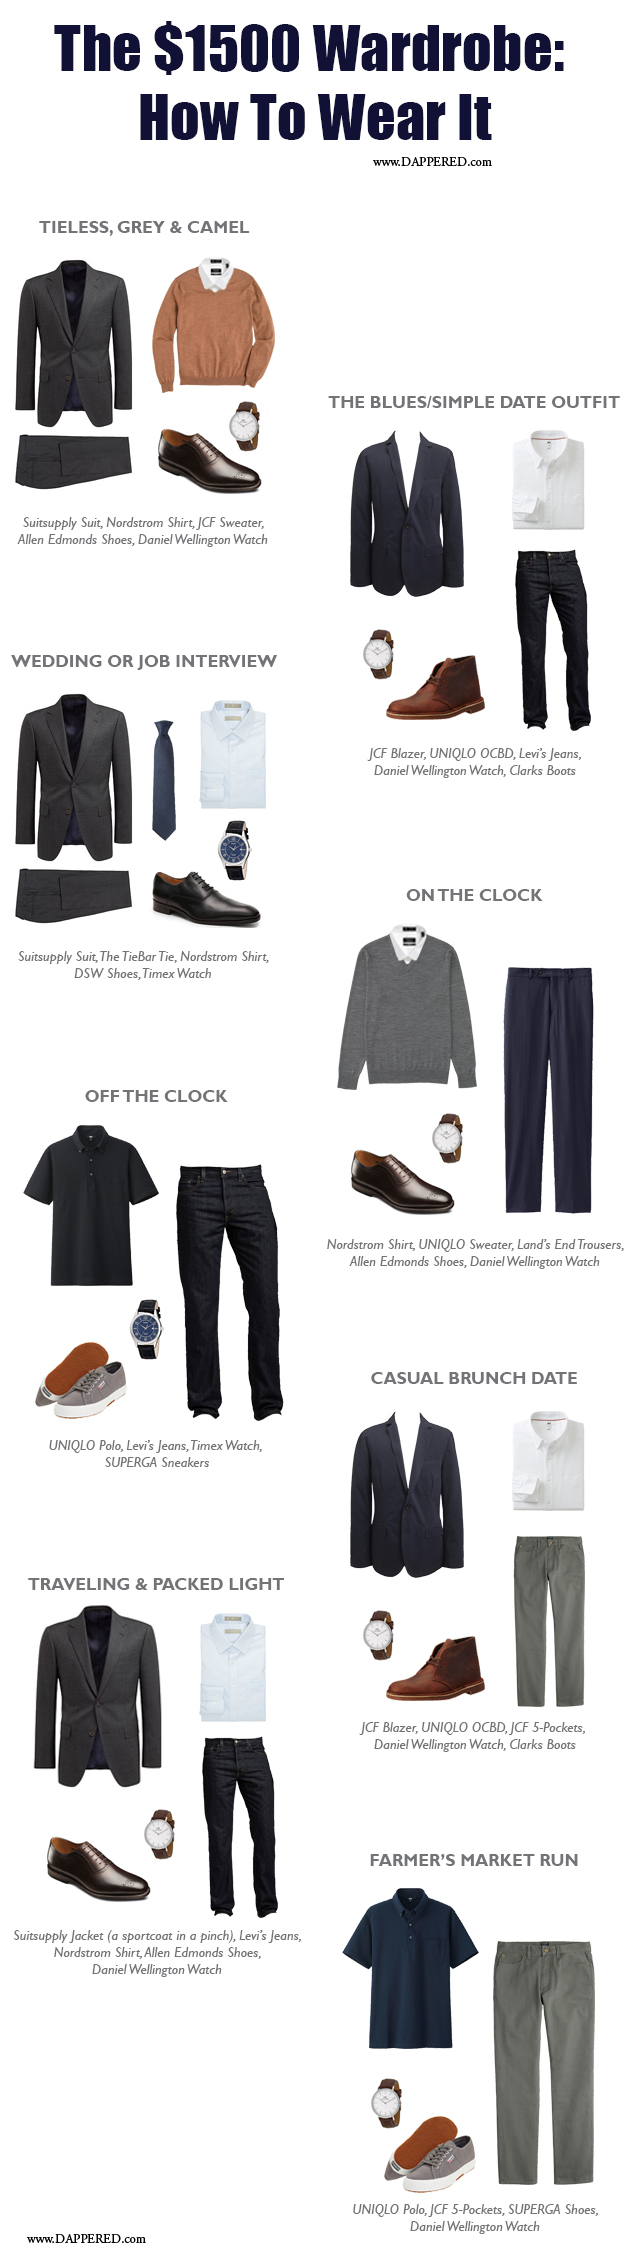 How to Wear it: The $1500 Wardrobe | Dappered.com